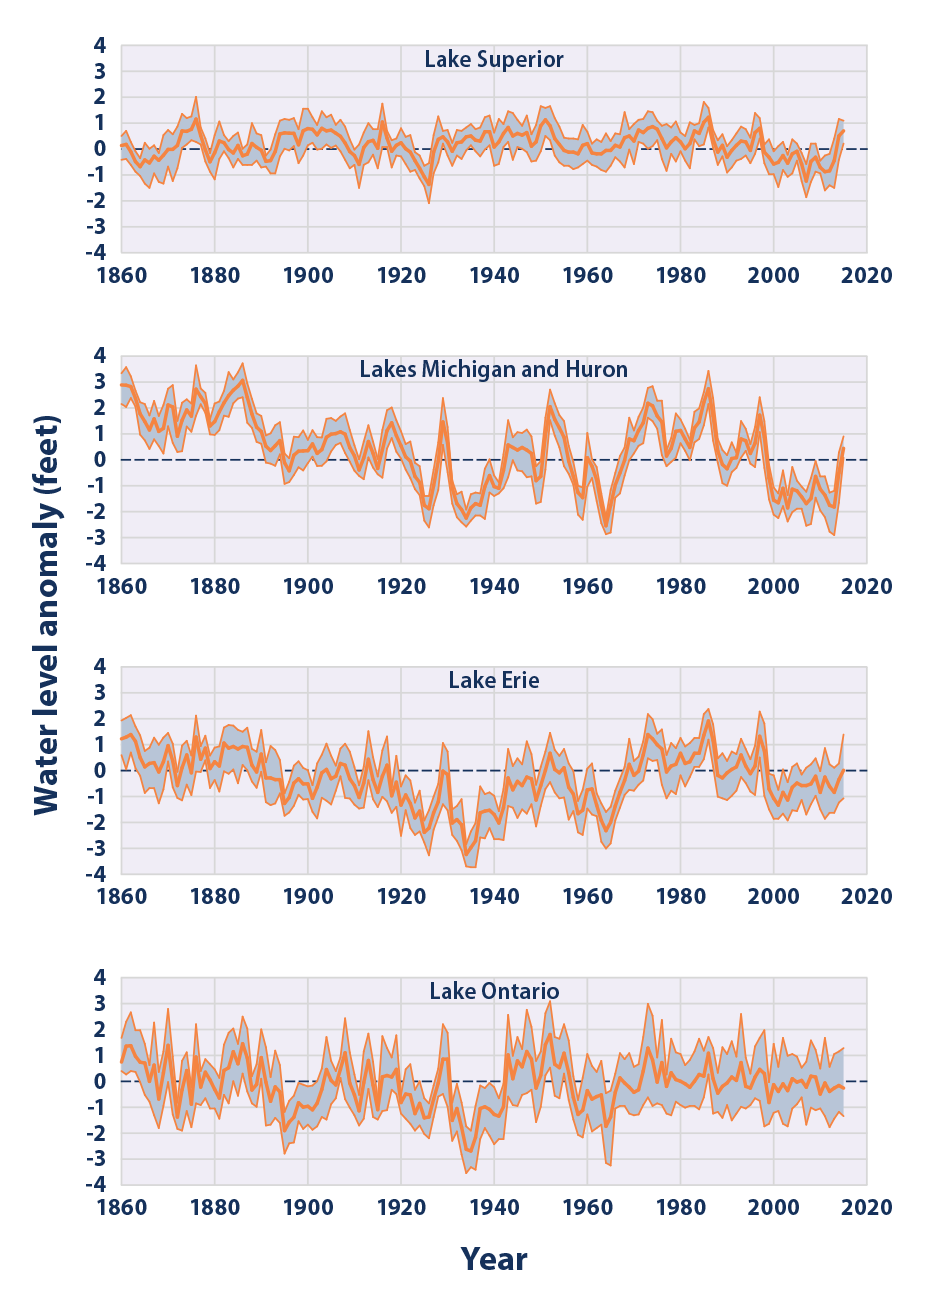 Line graphs showing water levels in each of the Great Lakes from 1860 to 2015.